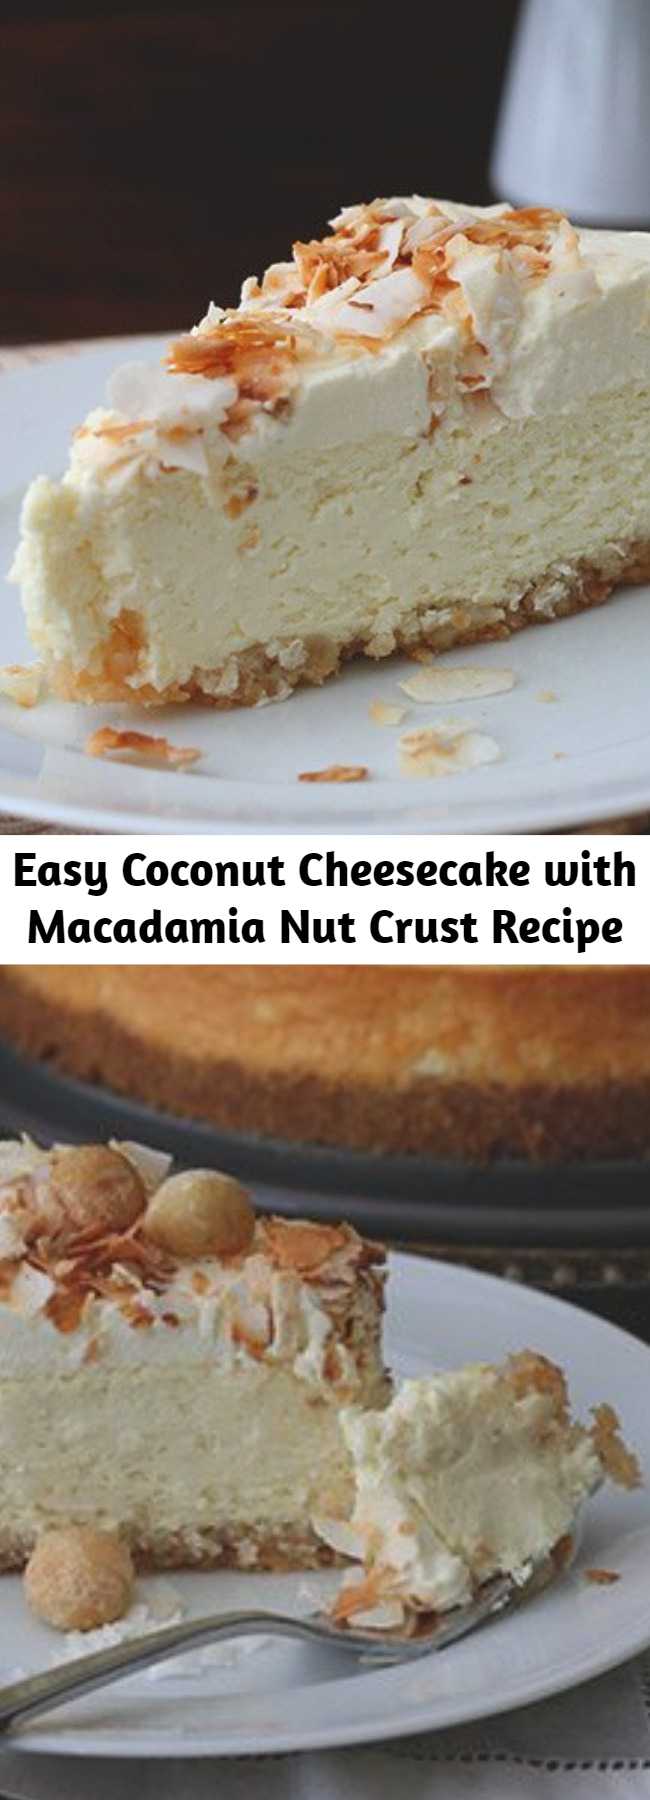 Easy Coconut Cheesecake with Macadamia Nut Crust Recipe - This coconut cheesecake has a macadamia nut crust and is unbelievably creamy and rich. It’s a low carb dessert that’s as tasty as it is beautiful, and is sure to impress your friends! Keto and sugar-free, this is the best coconut cheesecake you will ever eat.